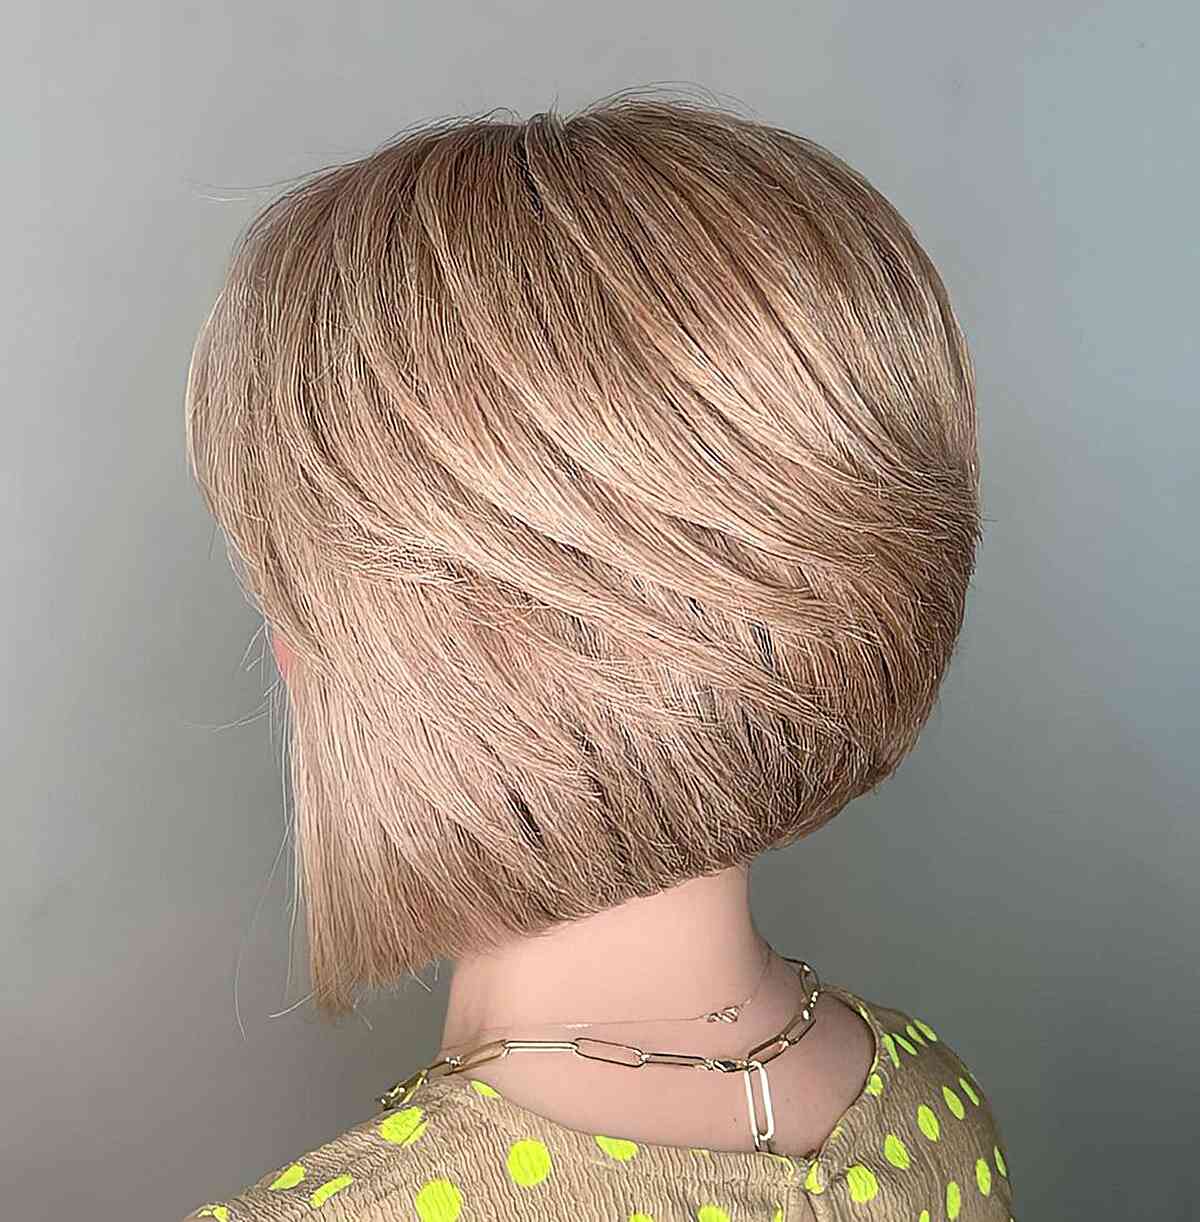 Neck-Length Thick Concave Bob with Angled Feathery Layers